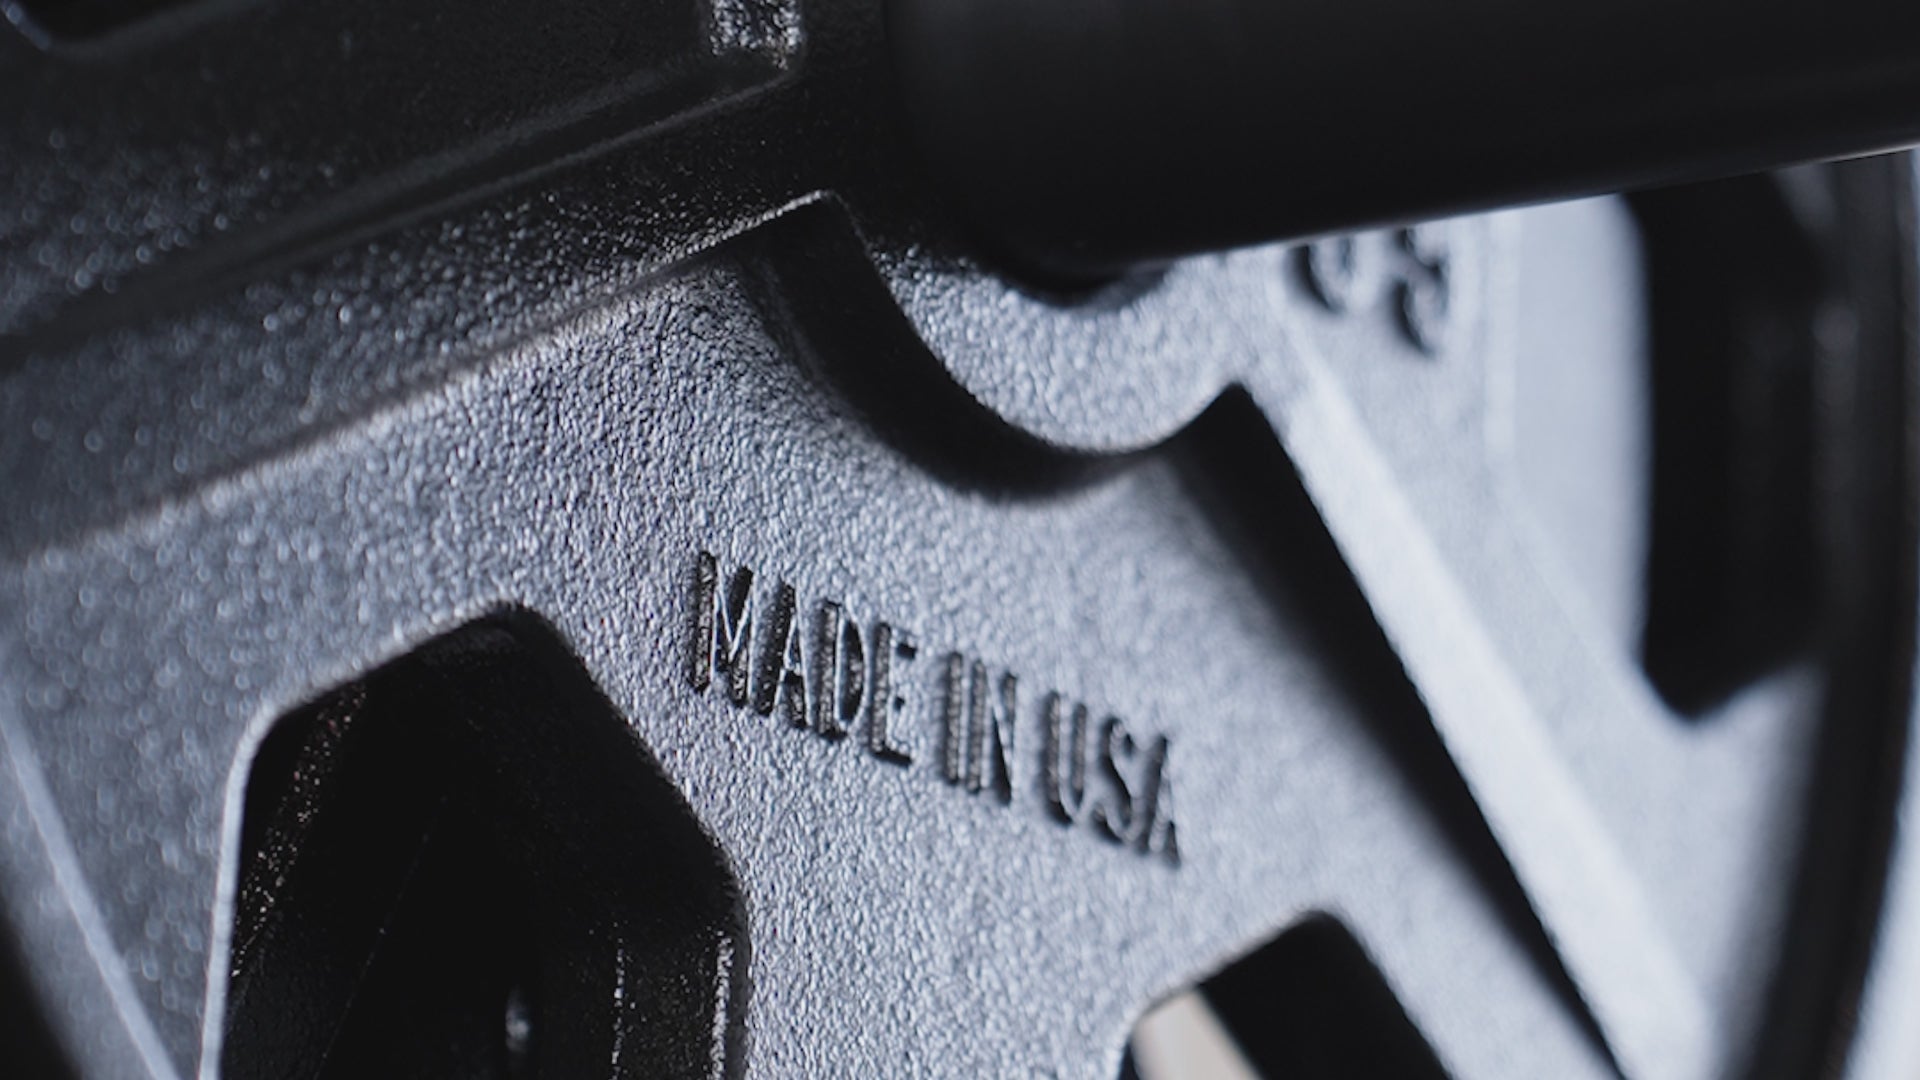 Short video close-up of the "Made in USA" text.